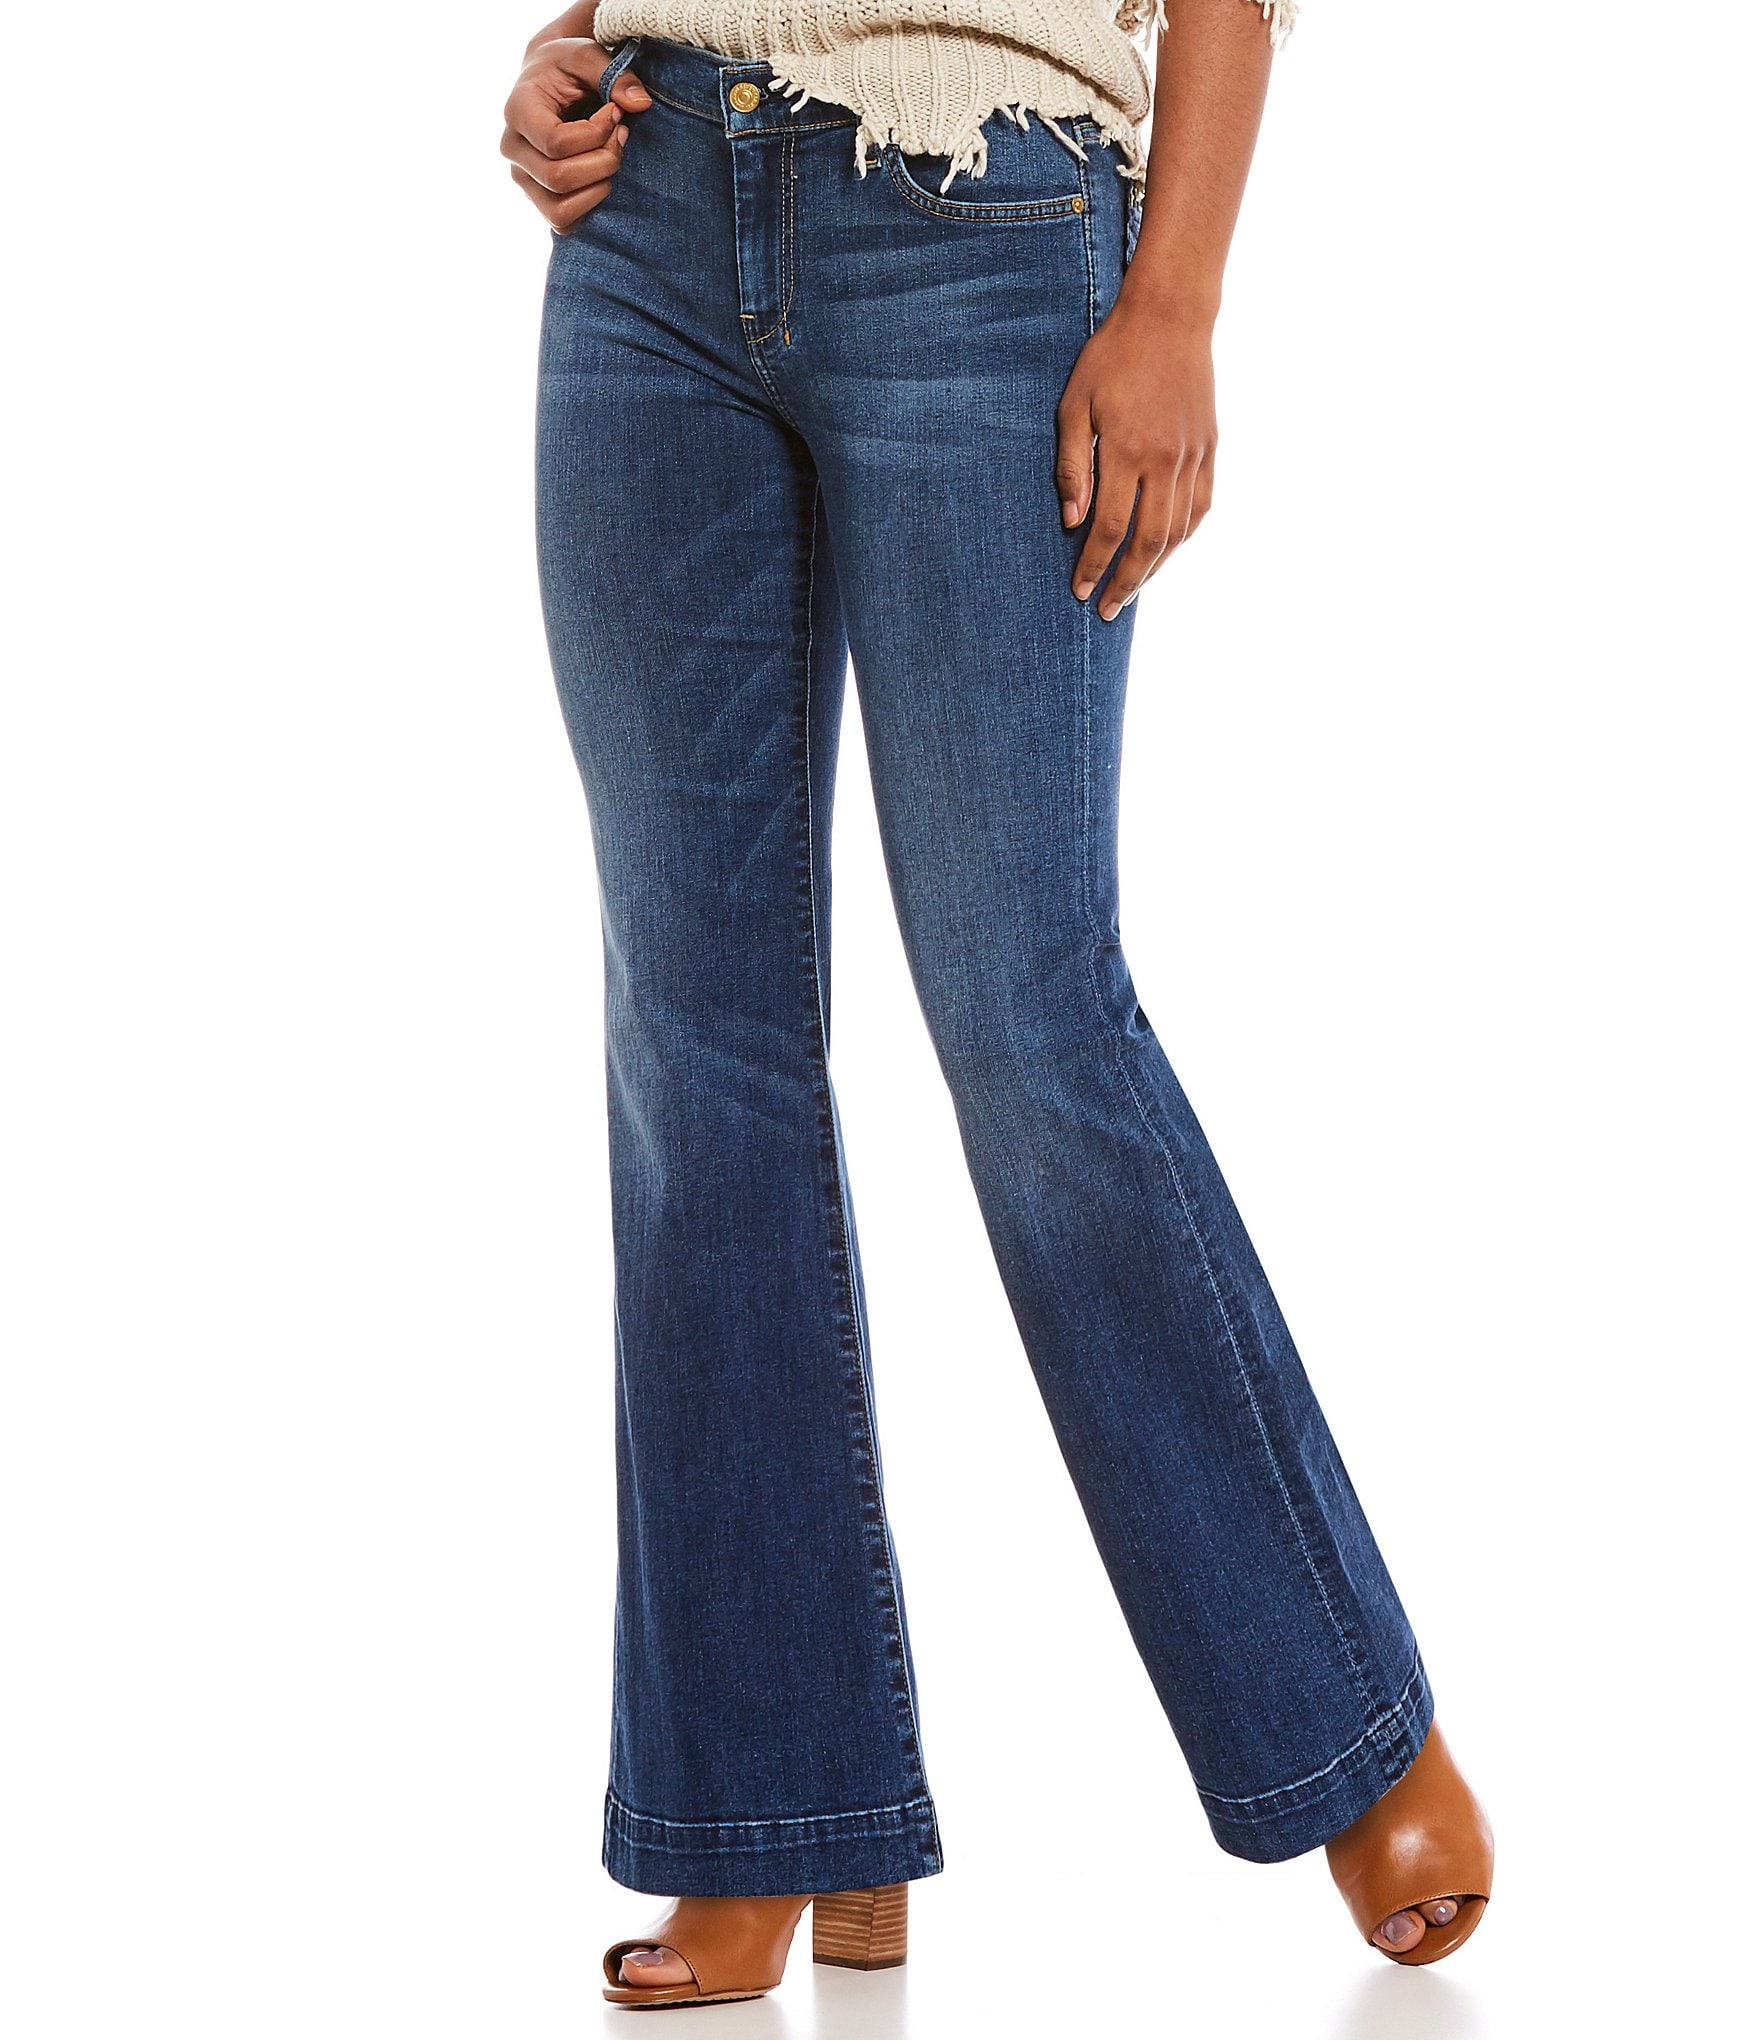 7 for all mankind dojo flare jeans